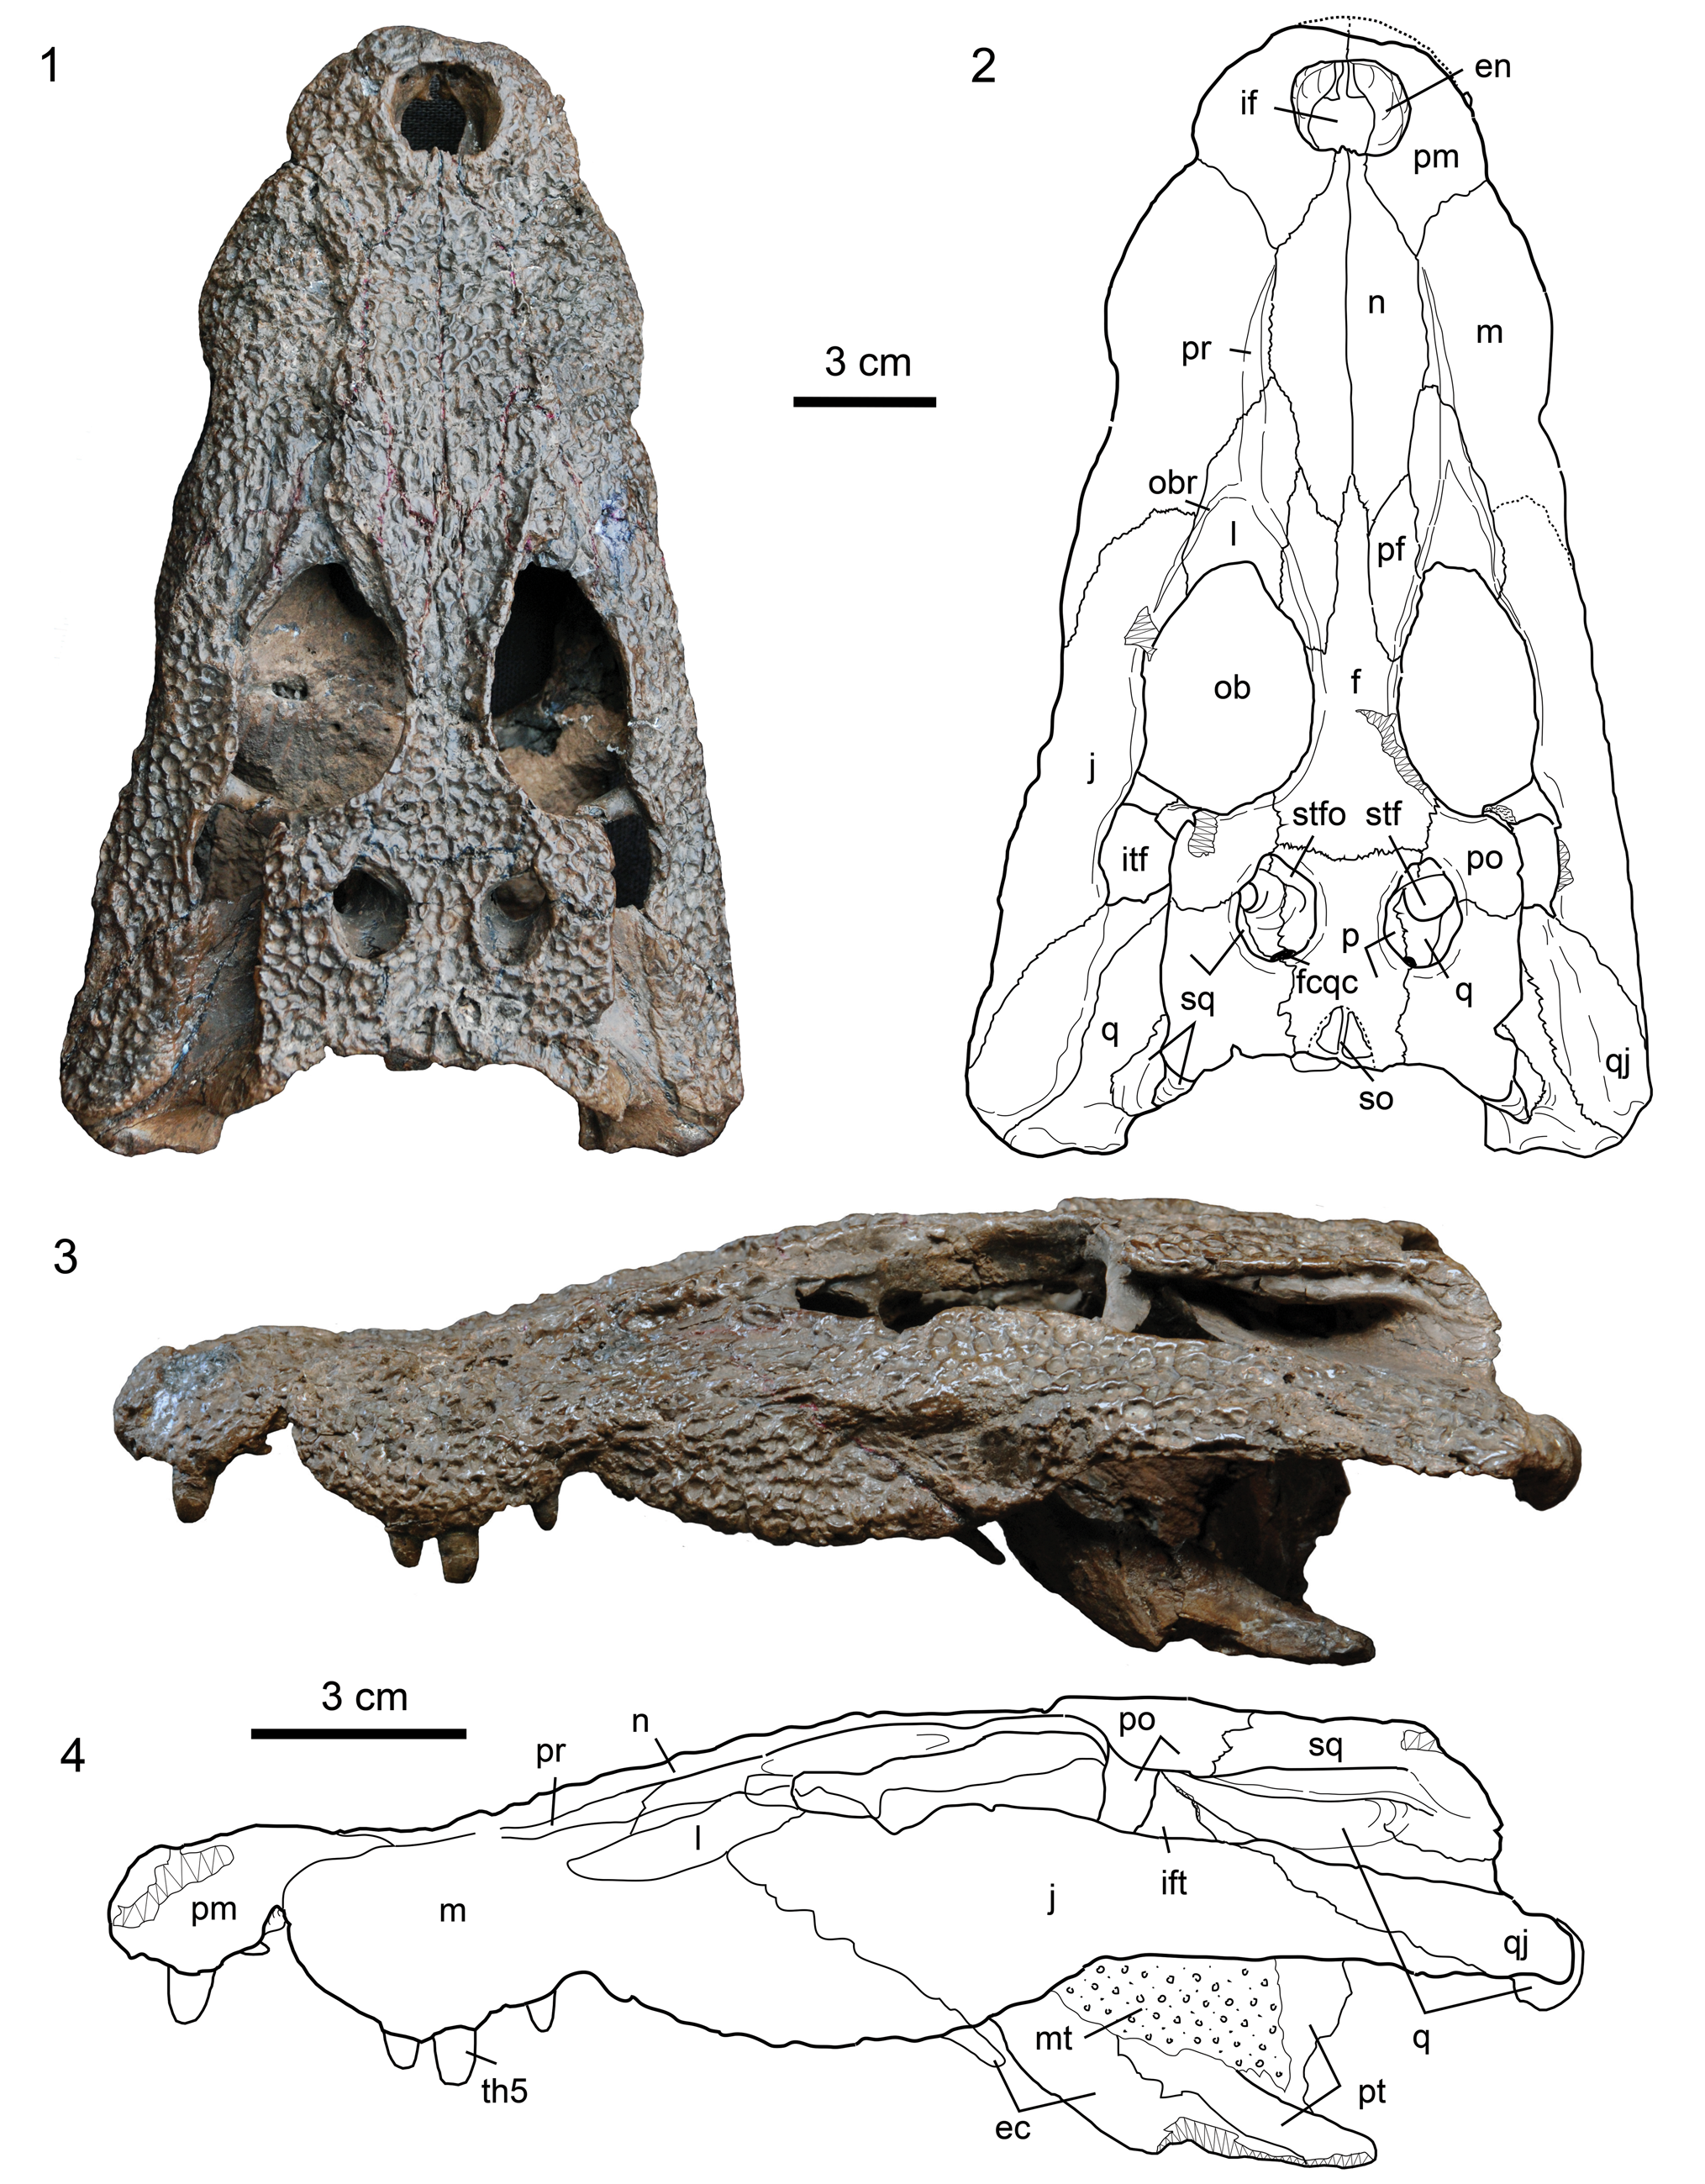 Full article: A systematic review of the giant alligatoroid Deinosuchus  from the Campanian of North America and its implications for the  relationships at the root of Crocodylia